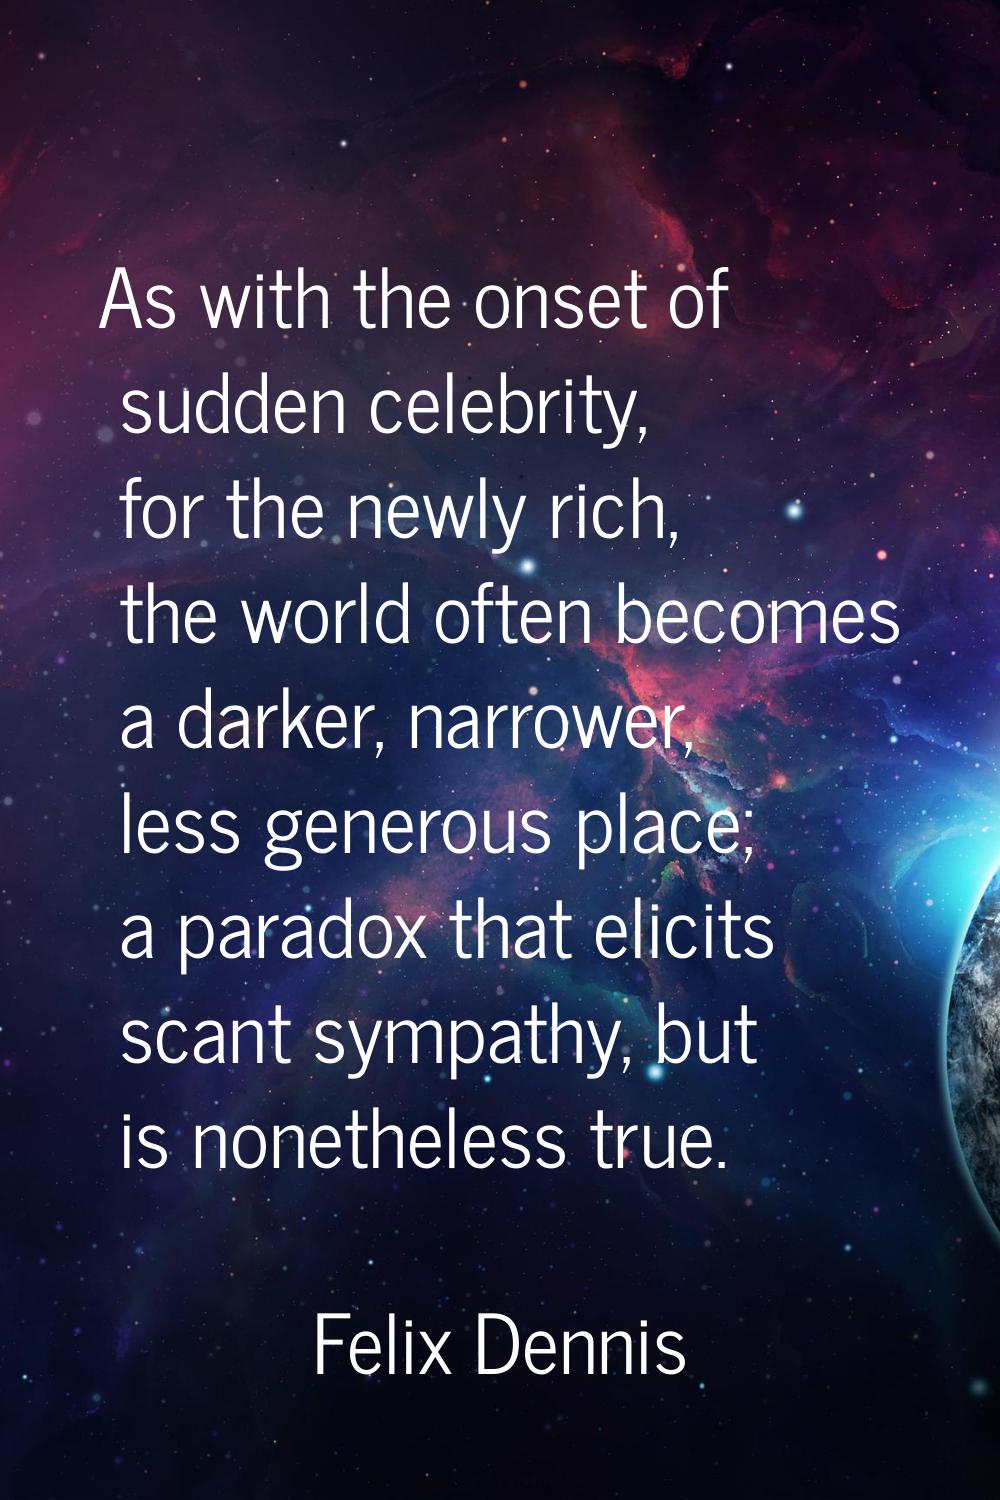 As with the onset of sudden celebrity, for the newly rich, the world often becomes a darker, narrow